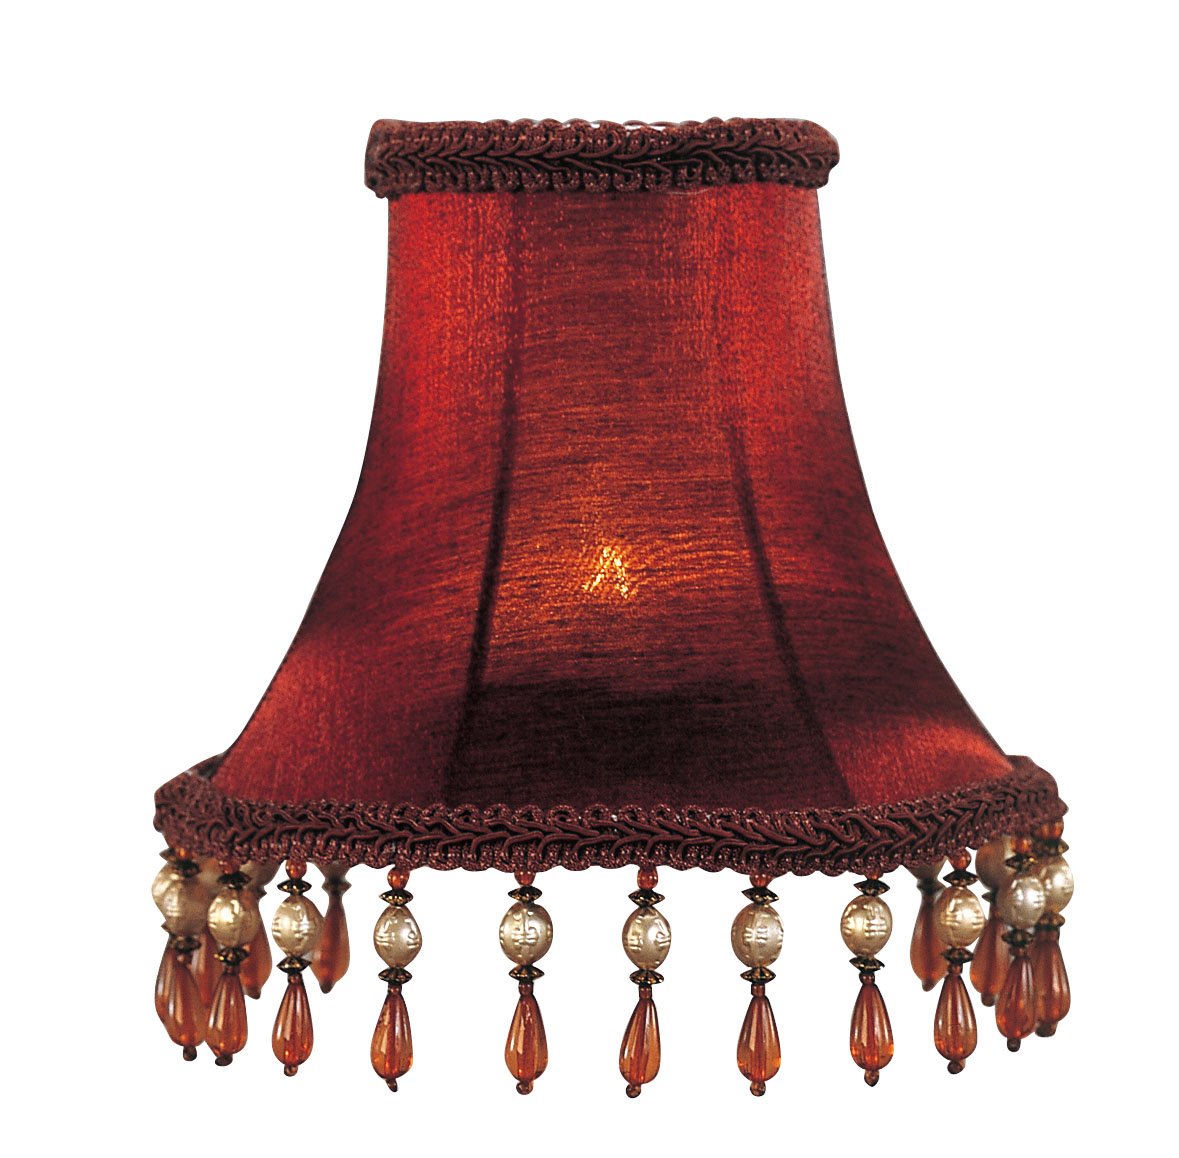 Livex Lighting S158 Bell Clip Chandelier Shade with Amber Beads, 1" x 1" x 1", Red Silk